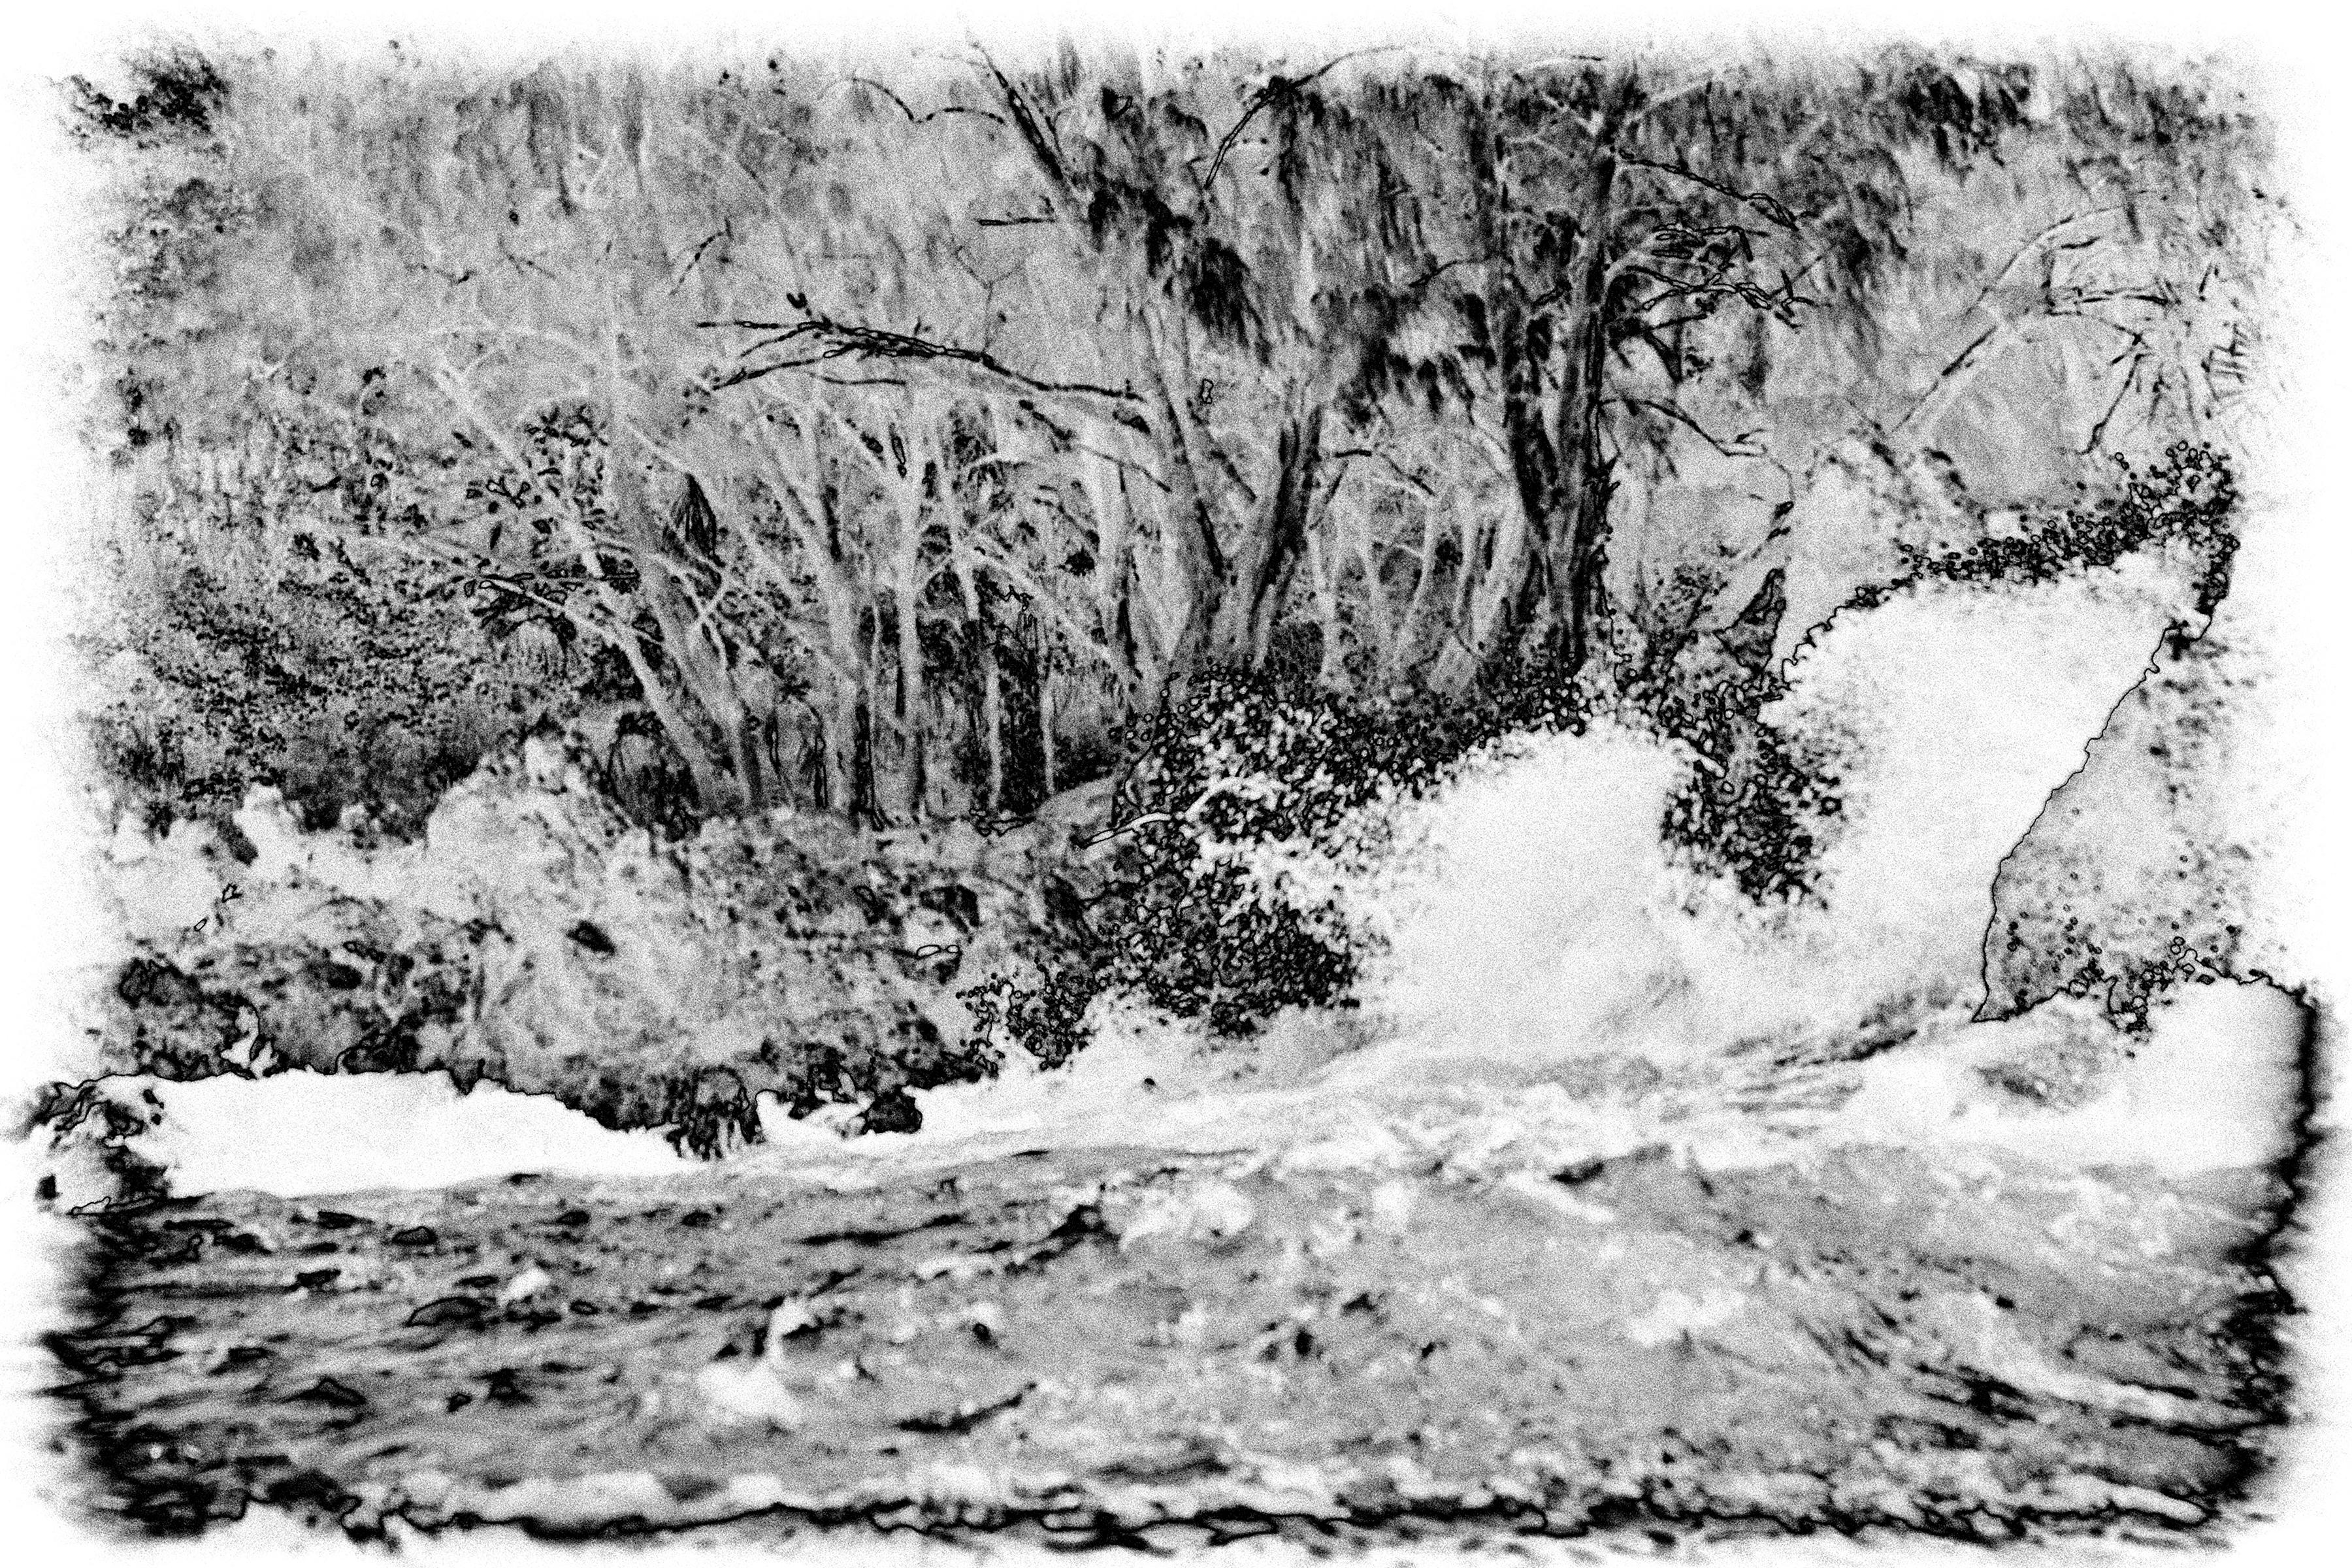 Holly Gordon Black and White Photograph - Water Music Series #5037 : landscape photography